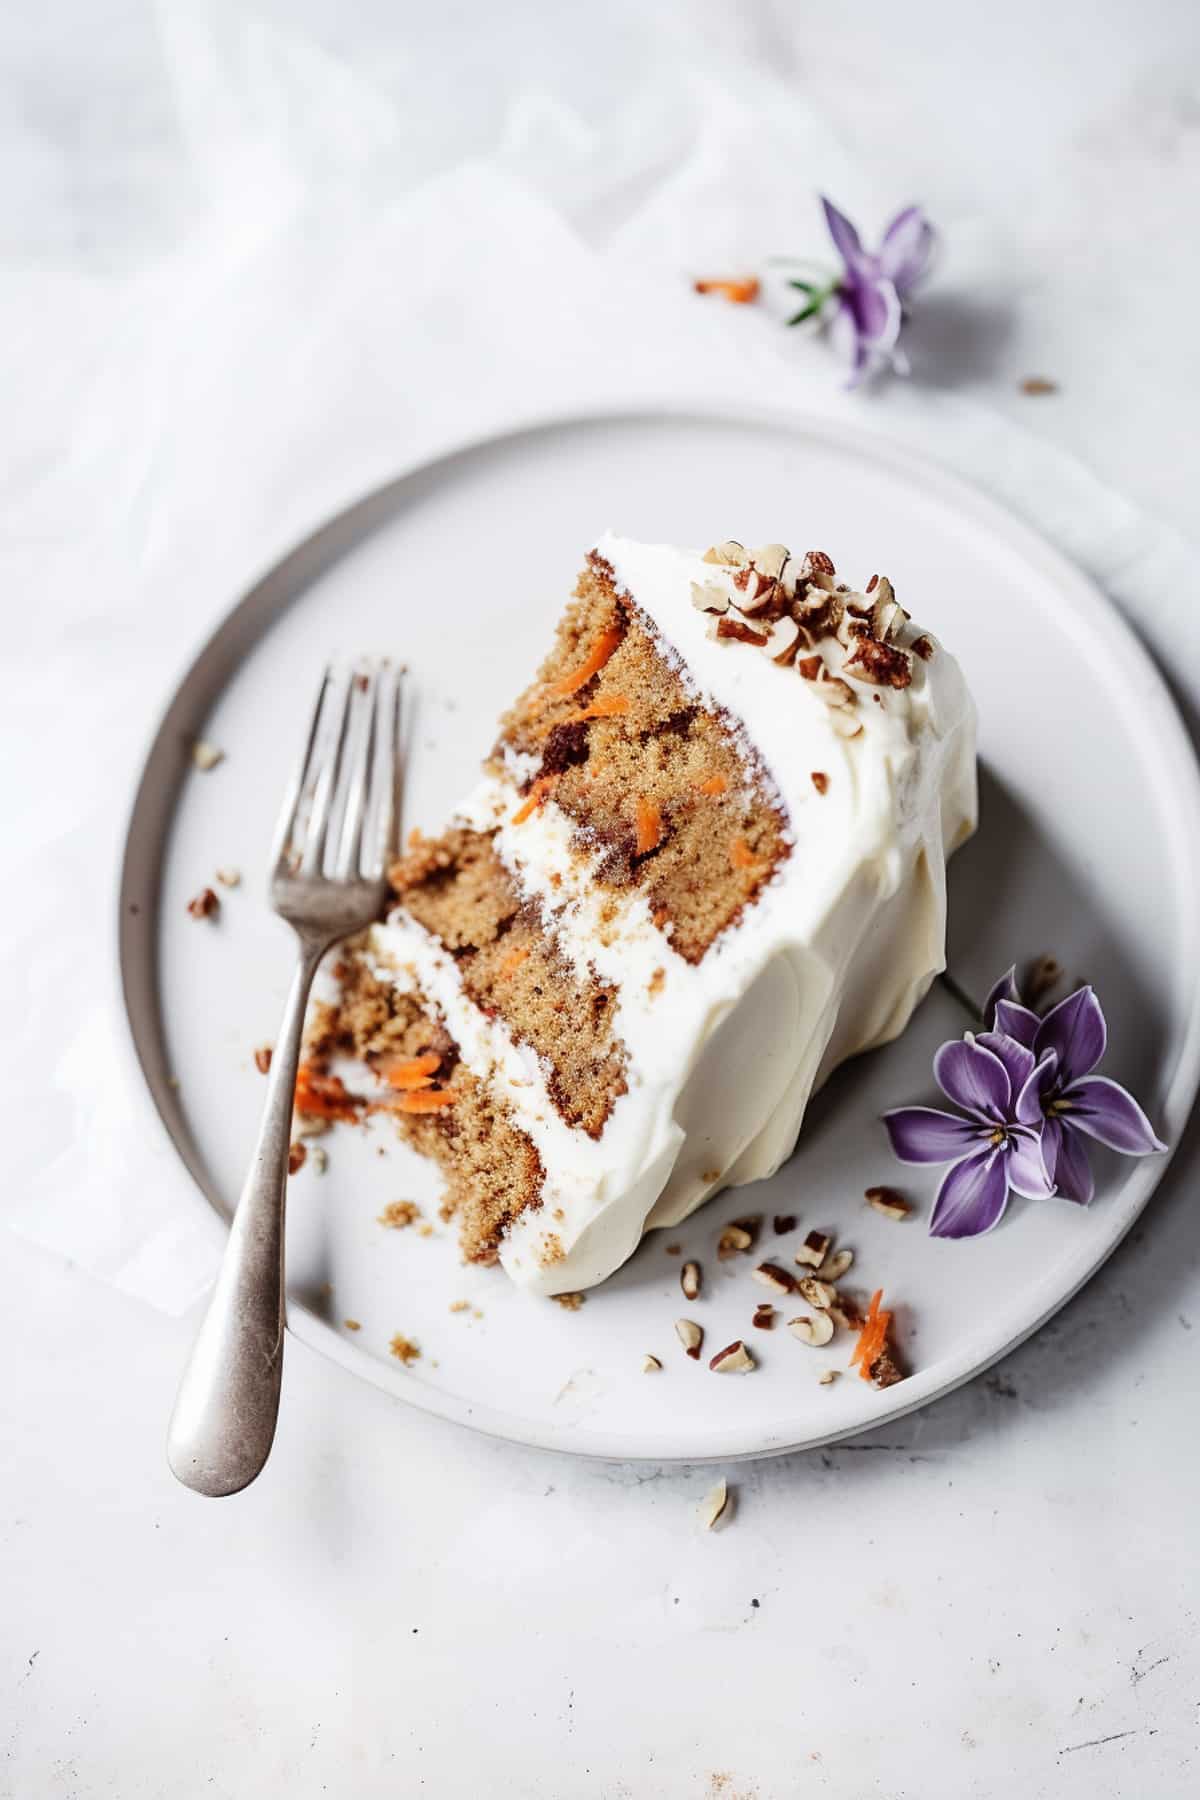 A slice of carrot cake with cream cheese frosting.